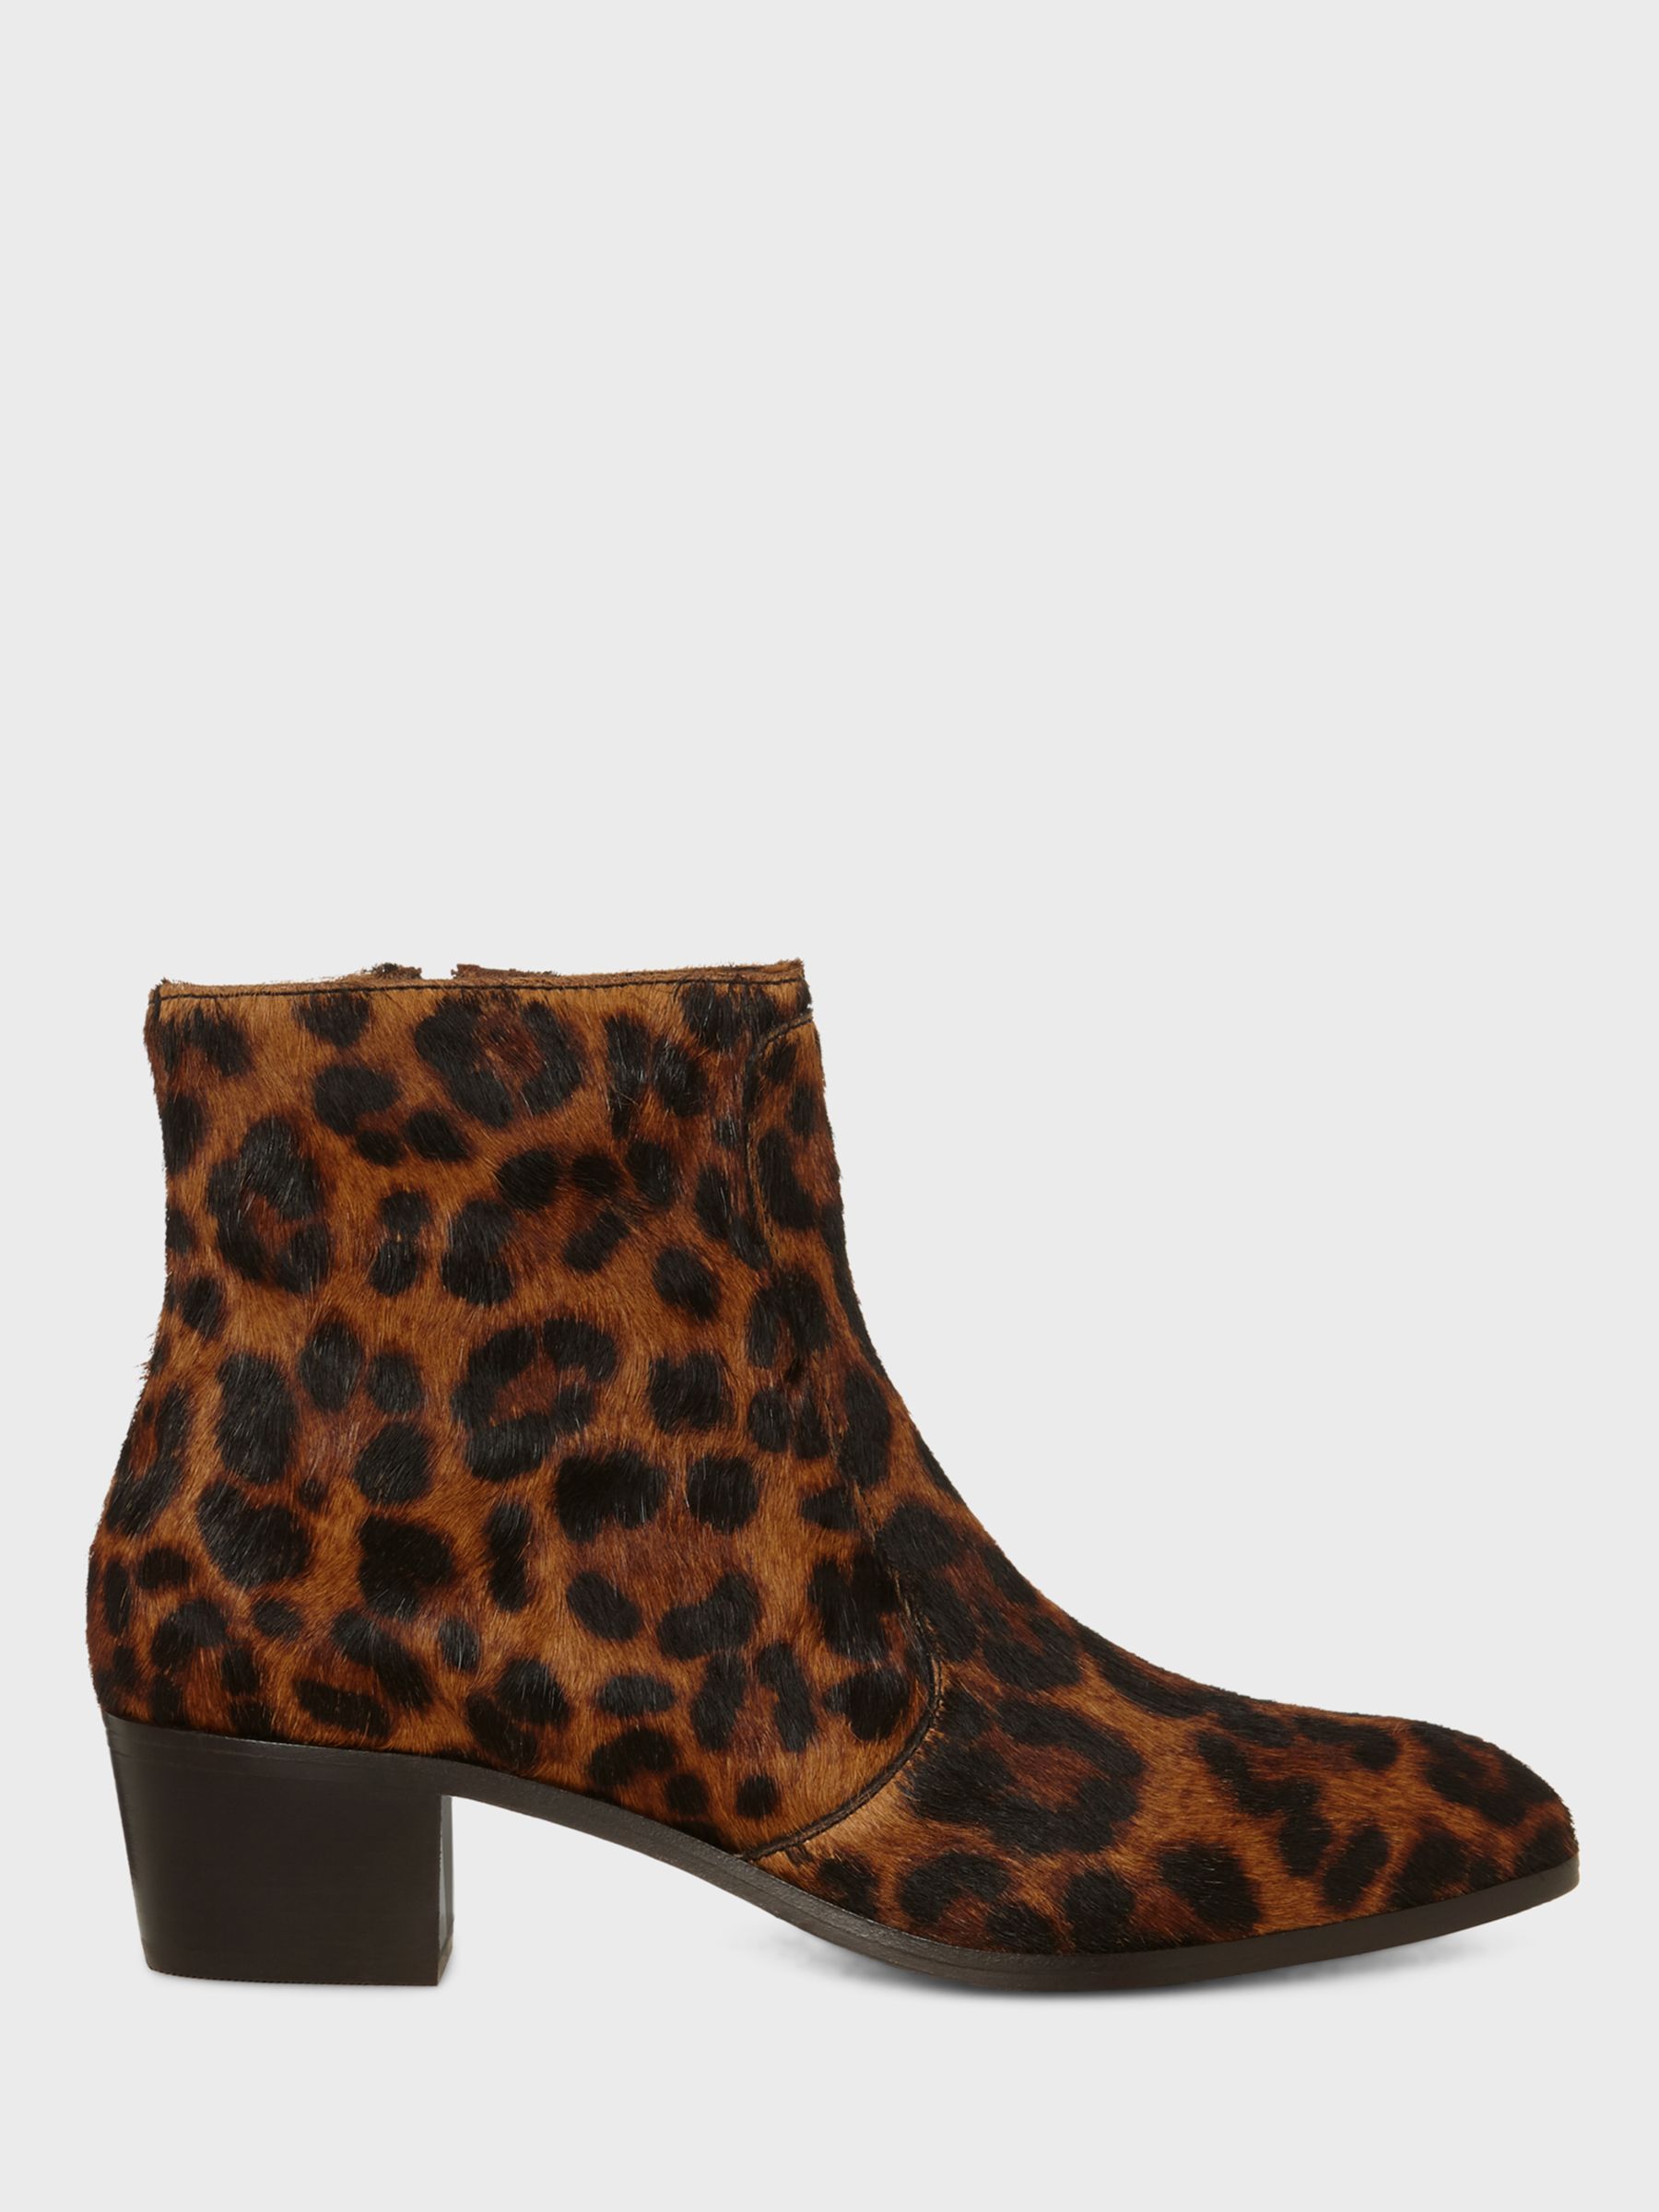 Hobbs Shona Leather Ankle Boots, Tan at John Lewis & Partners